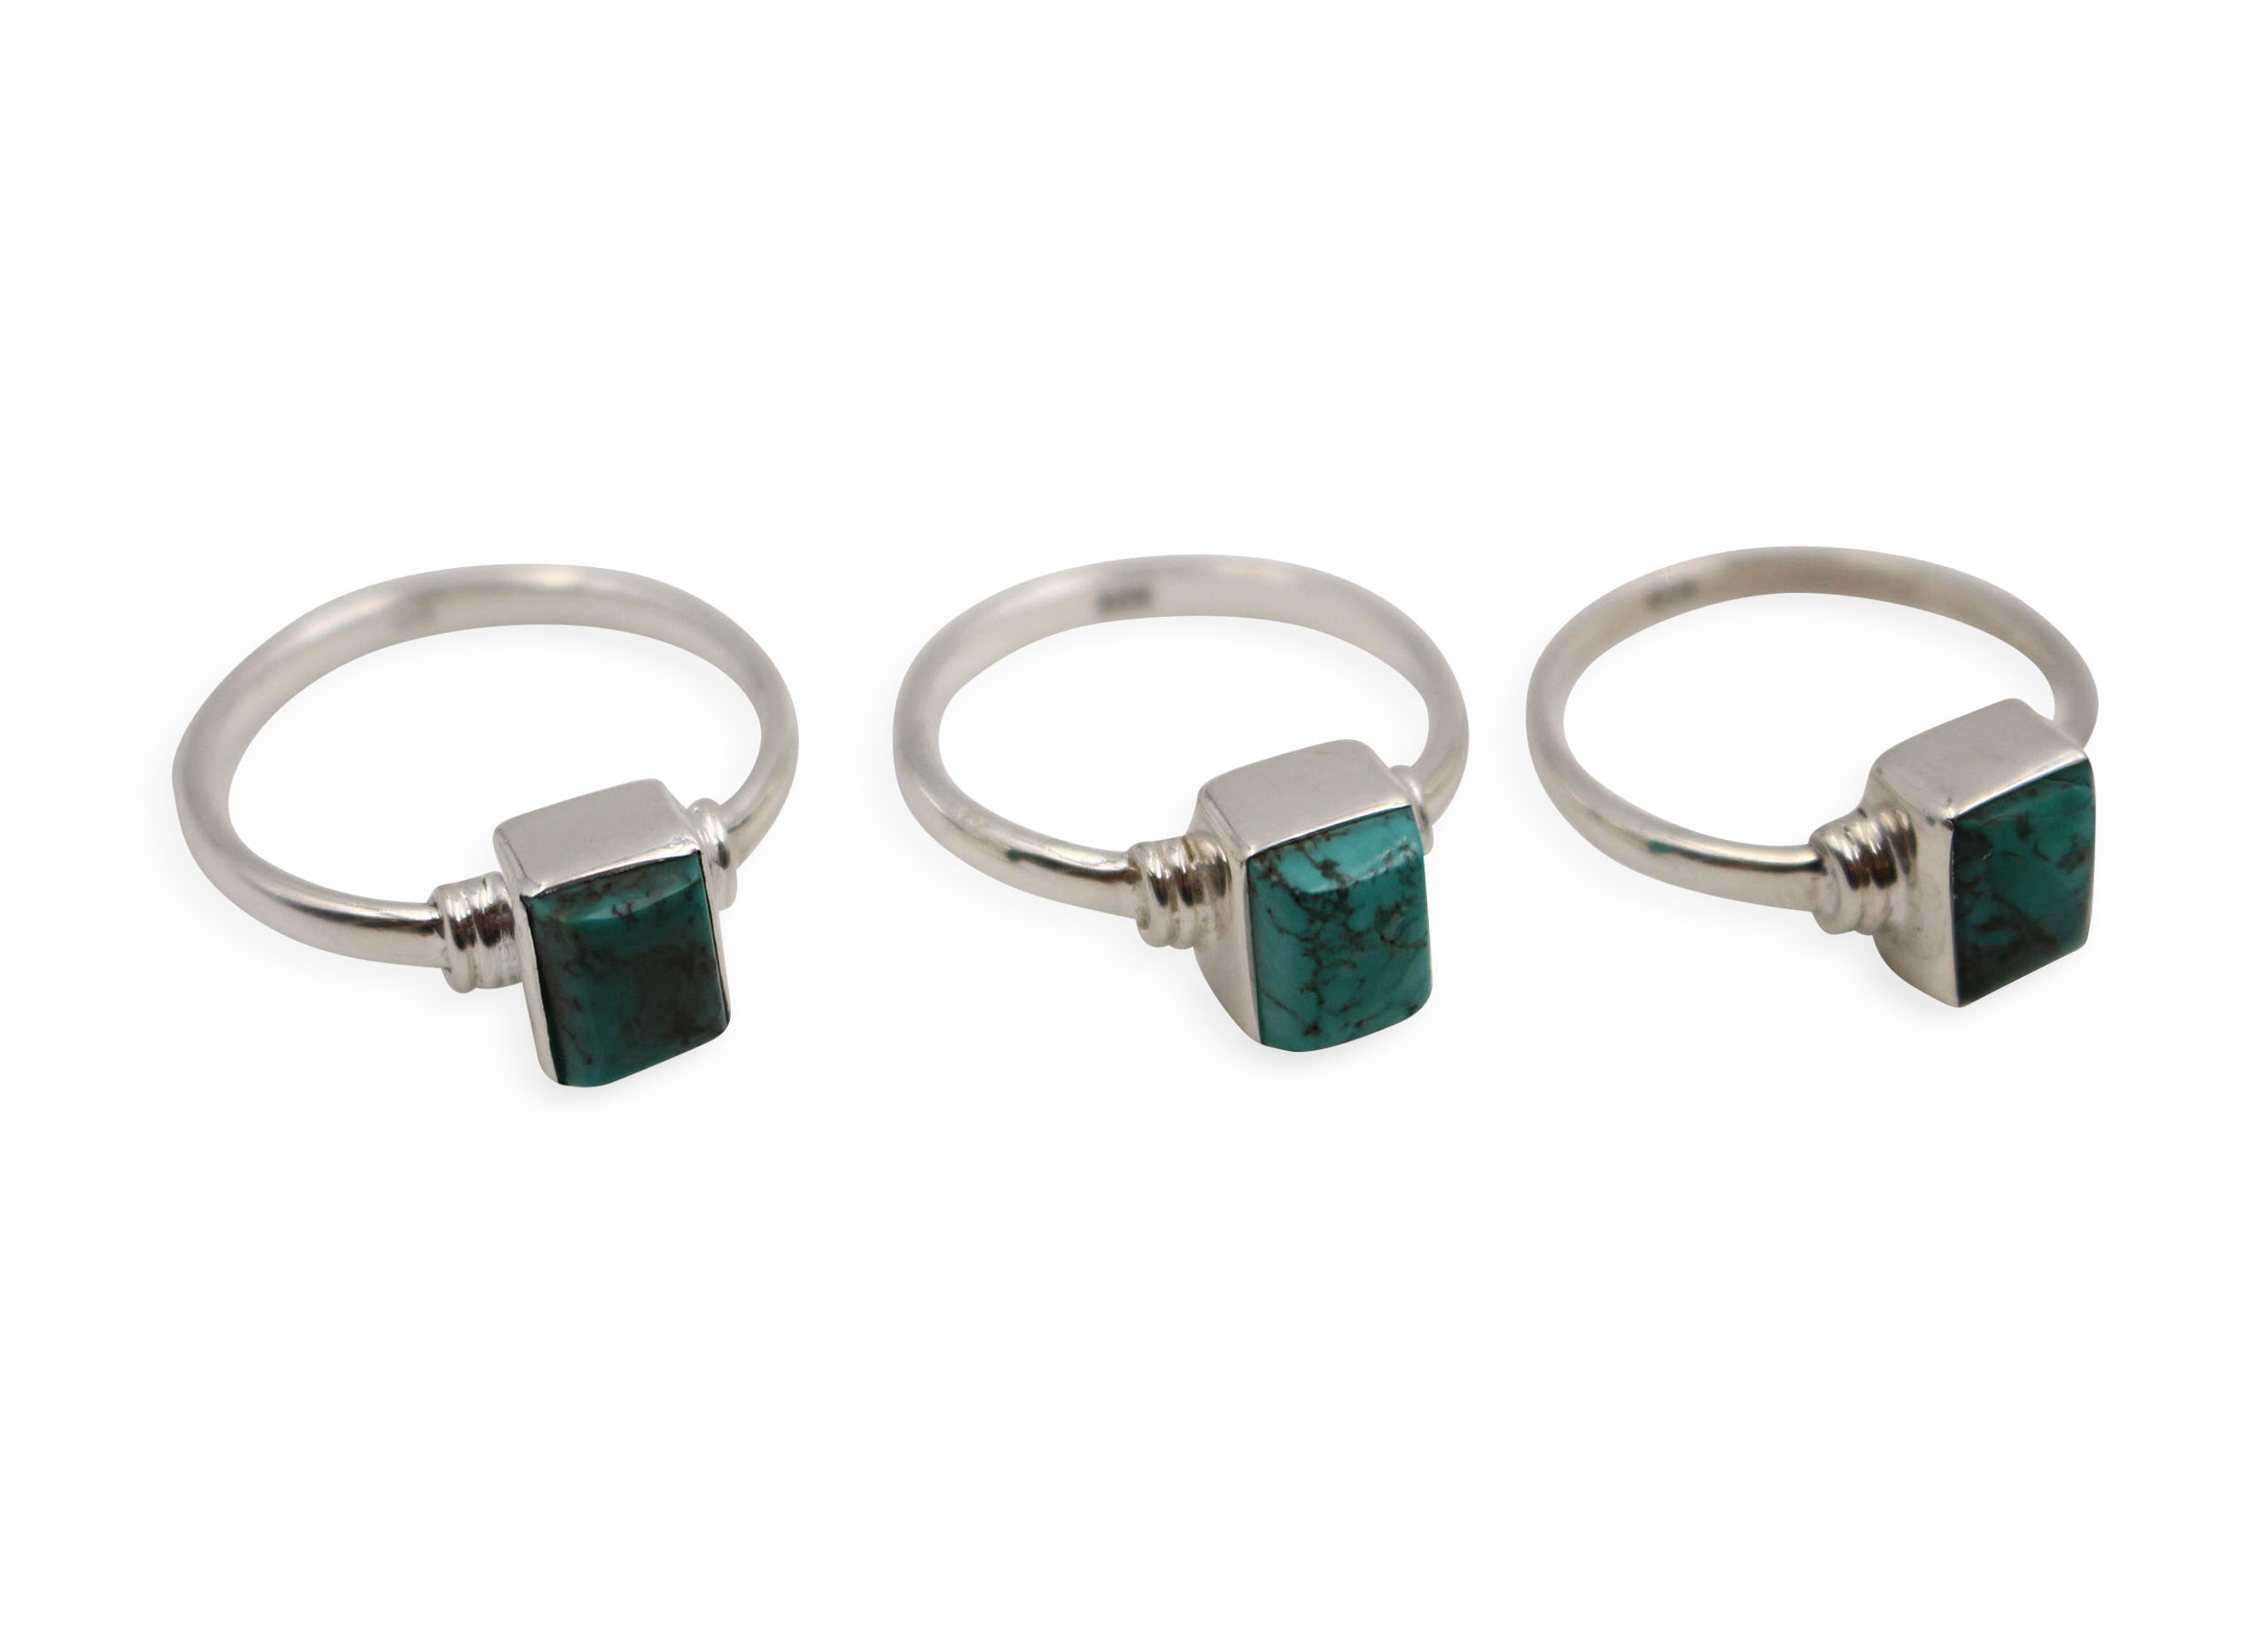 Turquoise _Virtus_ Sterling Silver Ring - Crystal Dreams